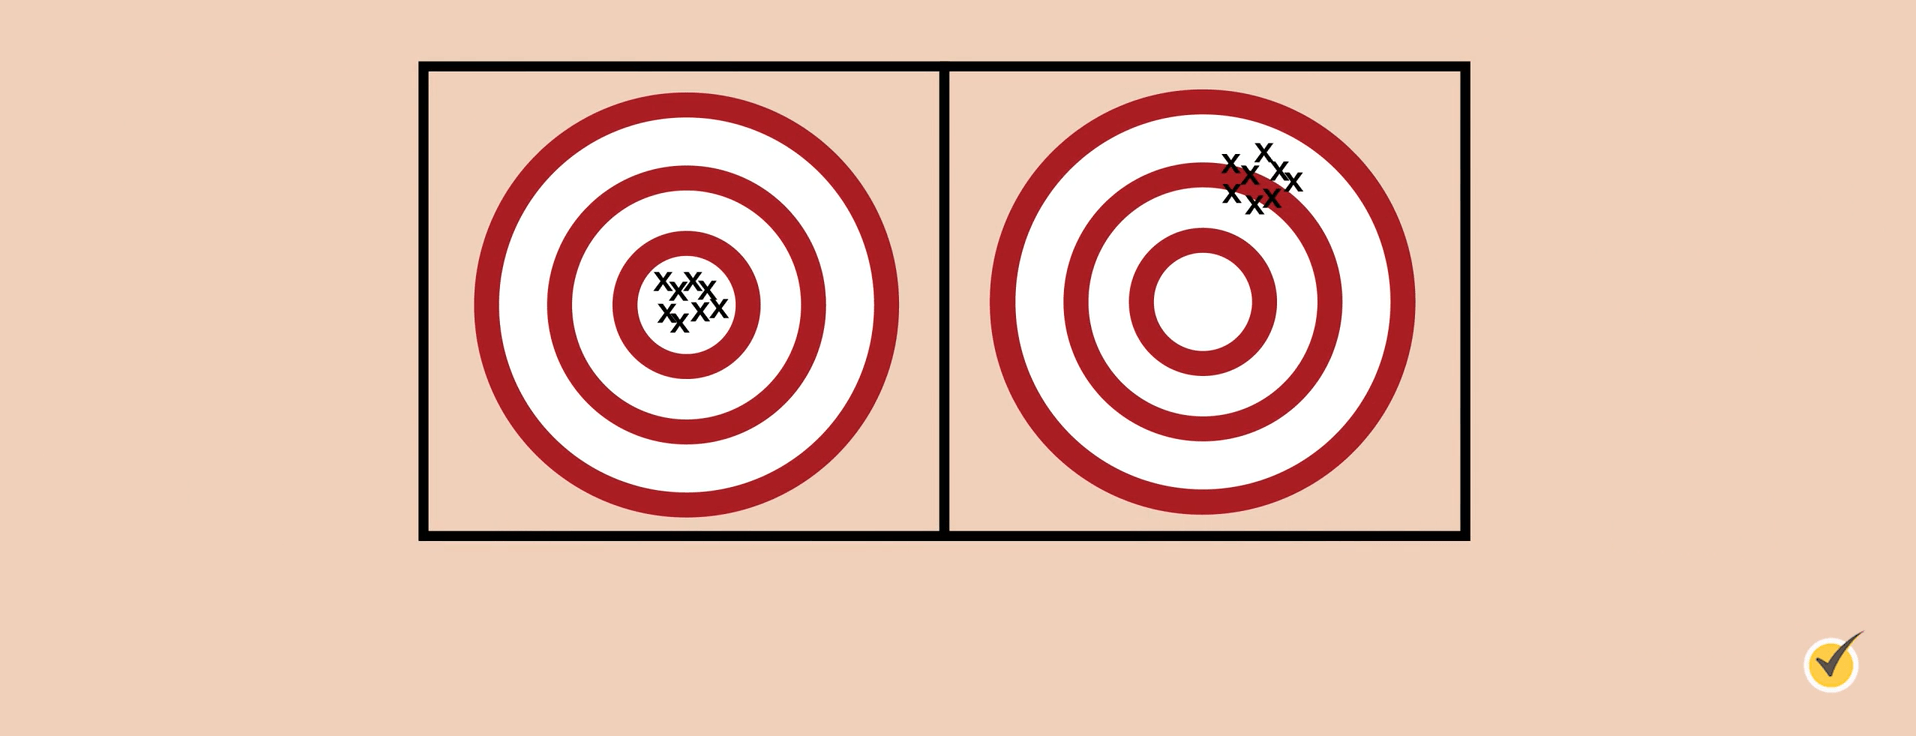 Image of 2 targets; the left target shows precision and accuracy, while the right just shows precision.